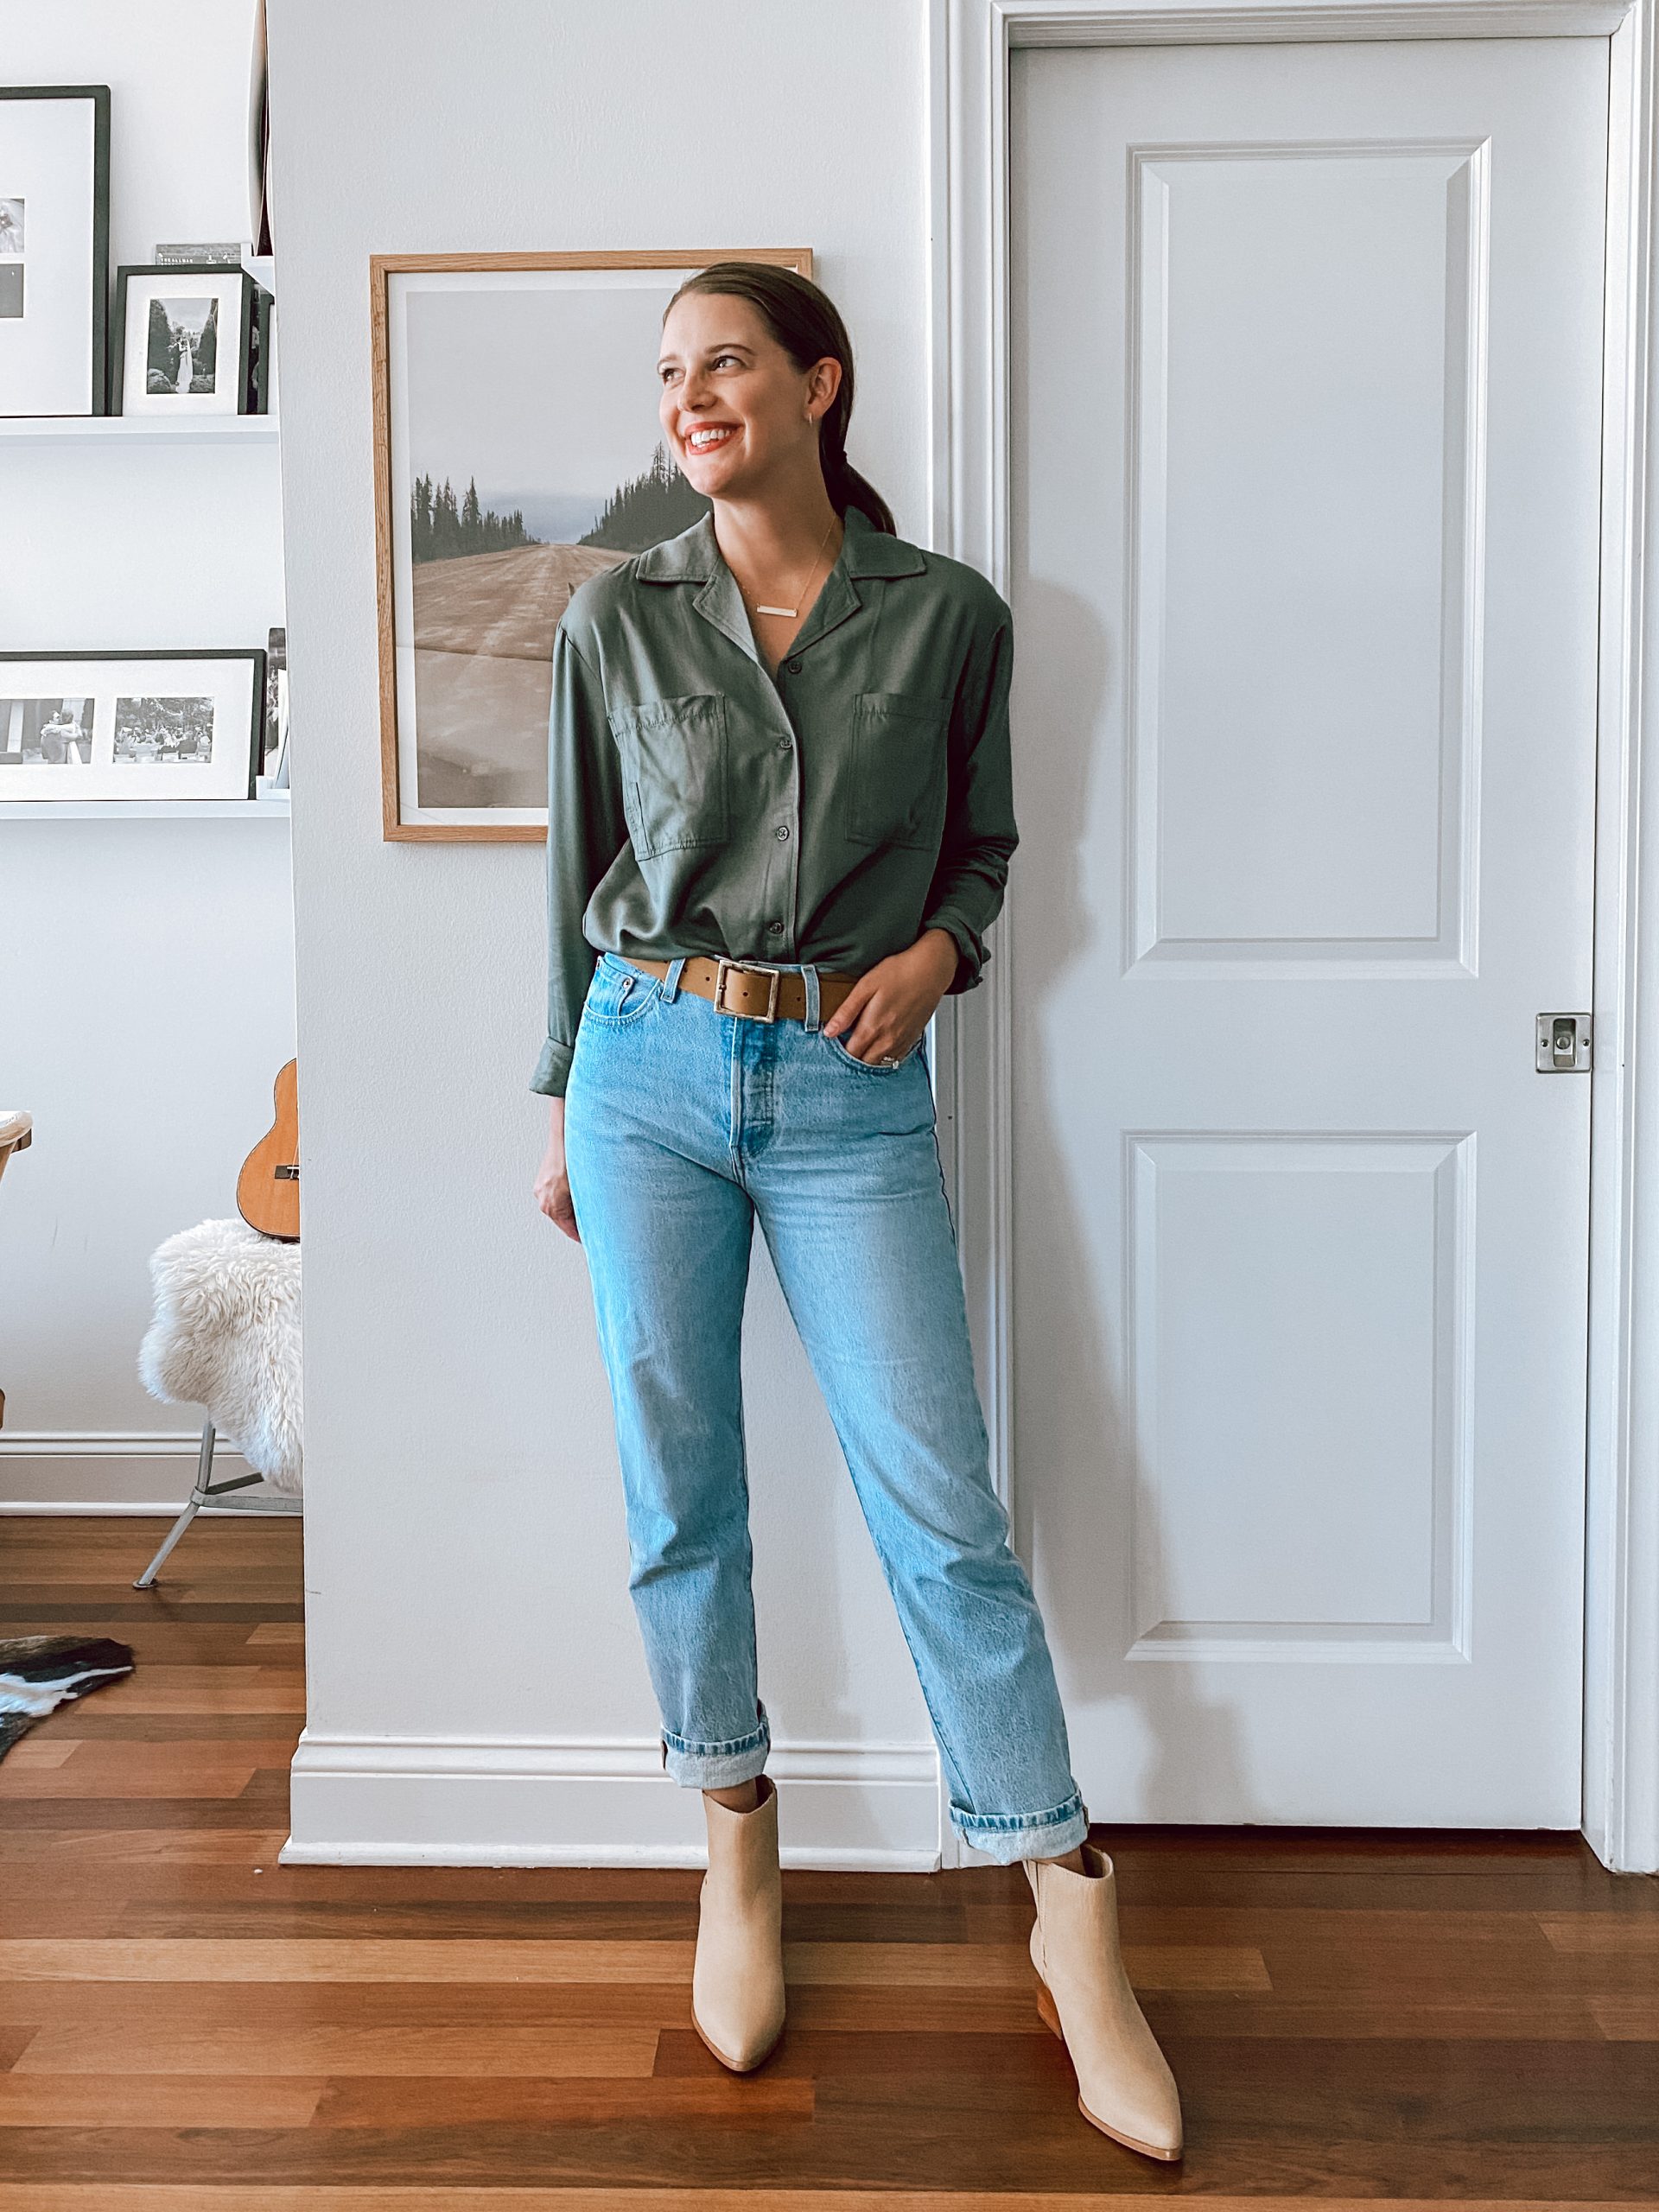 Straight-Leg Pants with heeled ankle boots | What shoes to wear with straight and wide-leg pants and jeans + 15 Outfit Ideas